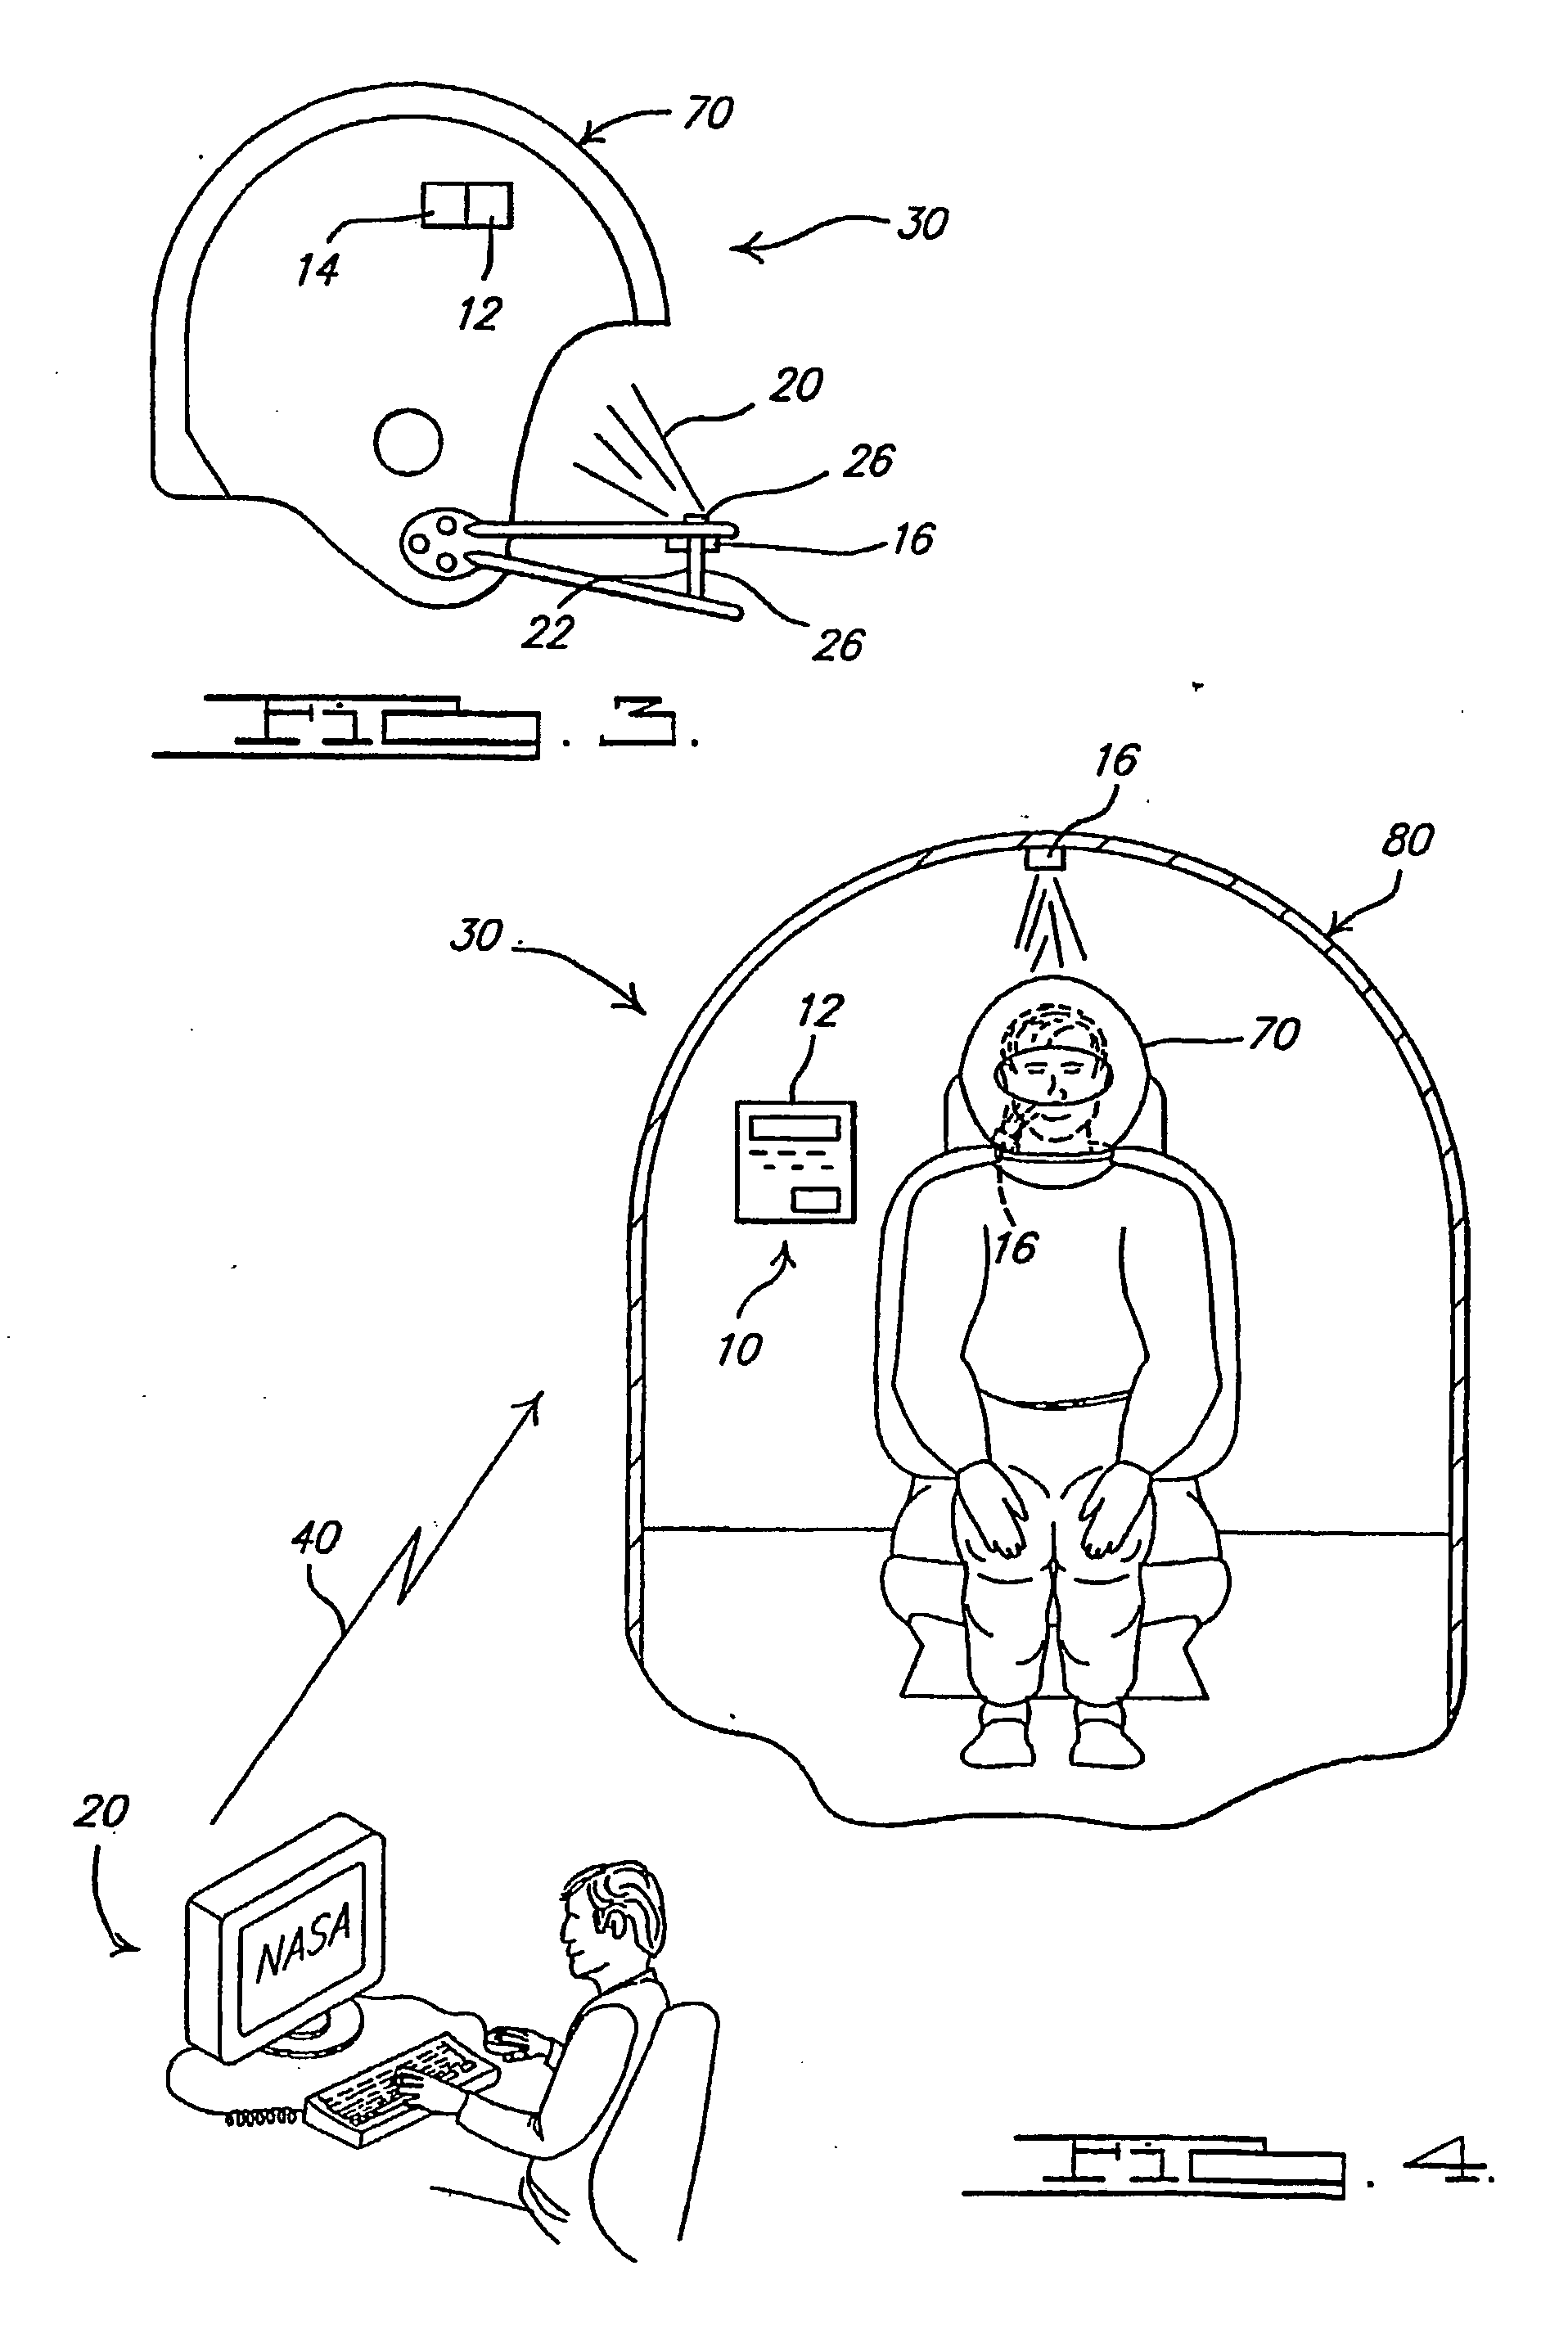 System and method of active neuro-protection for detecting and arresting traumatic brain injury and spinal cord injury